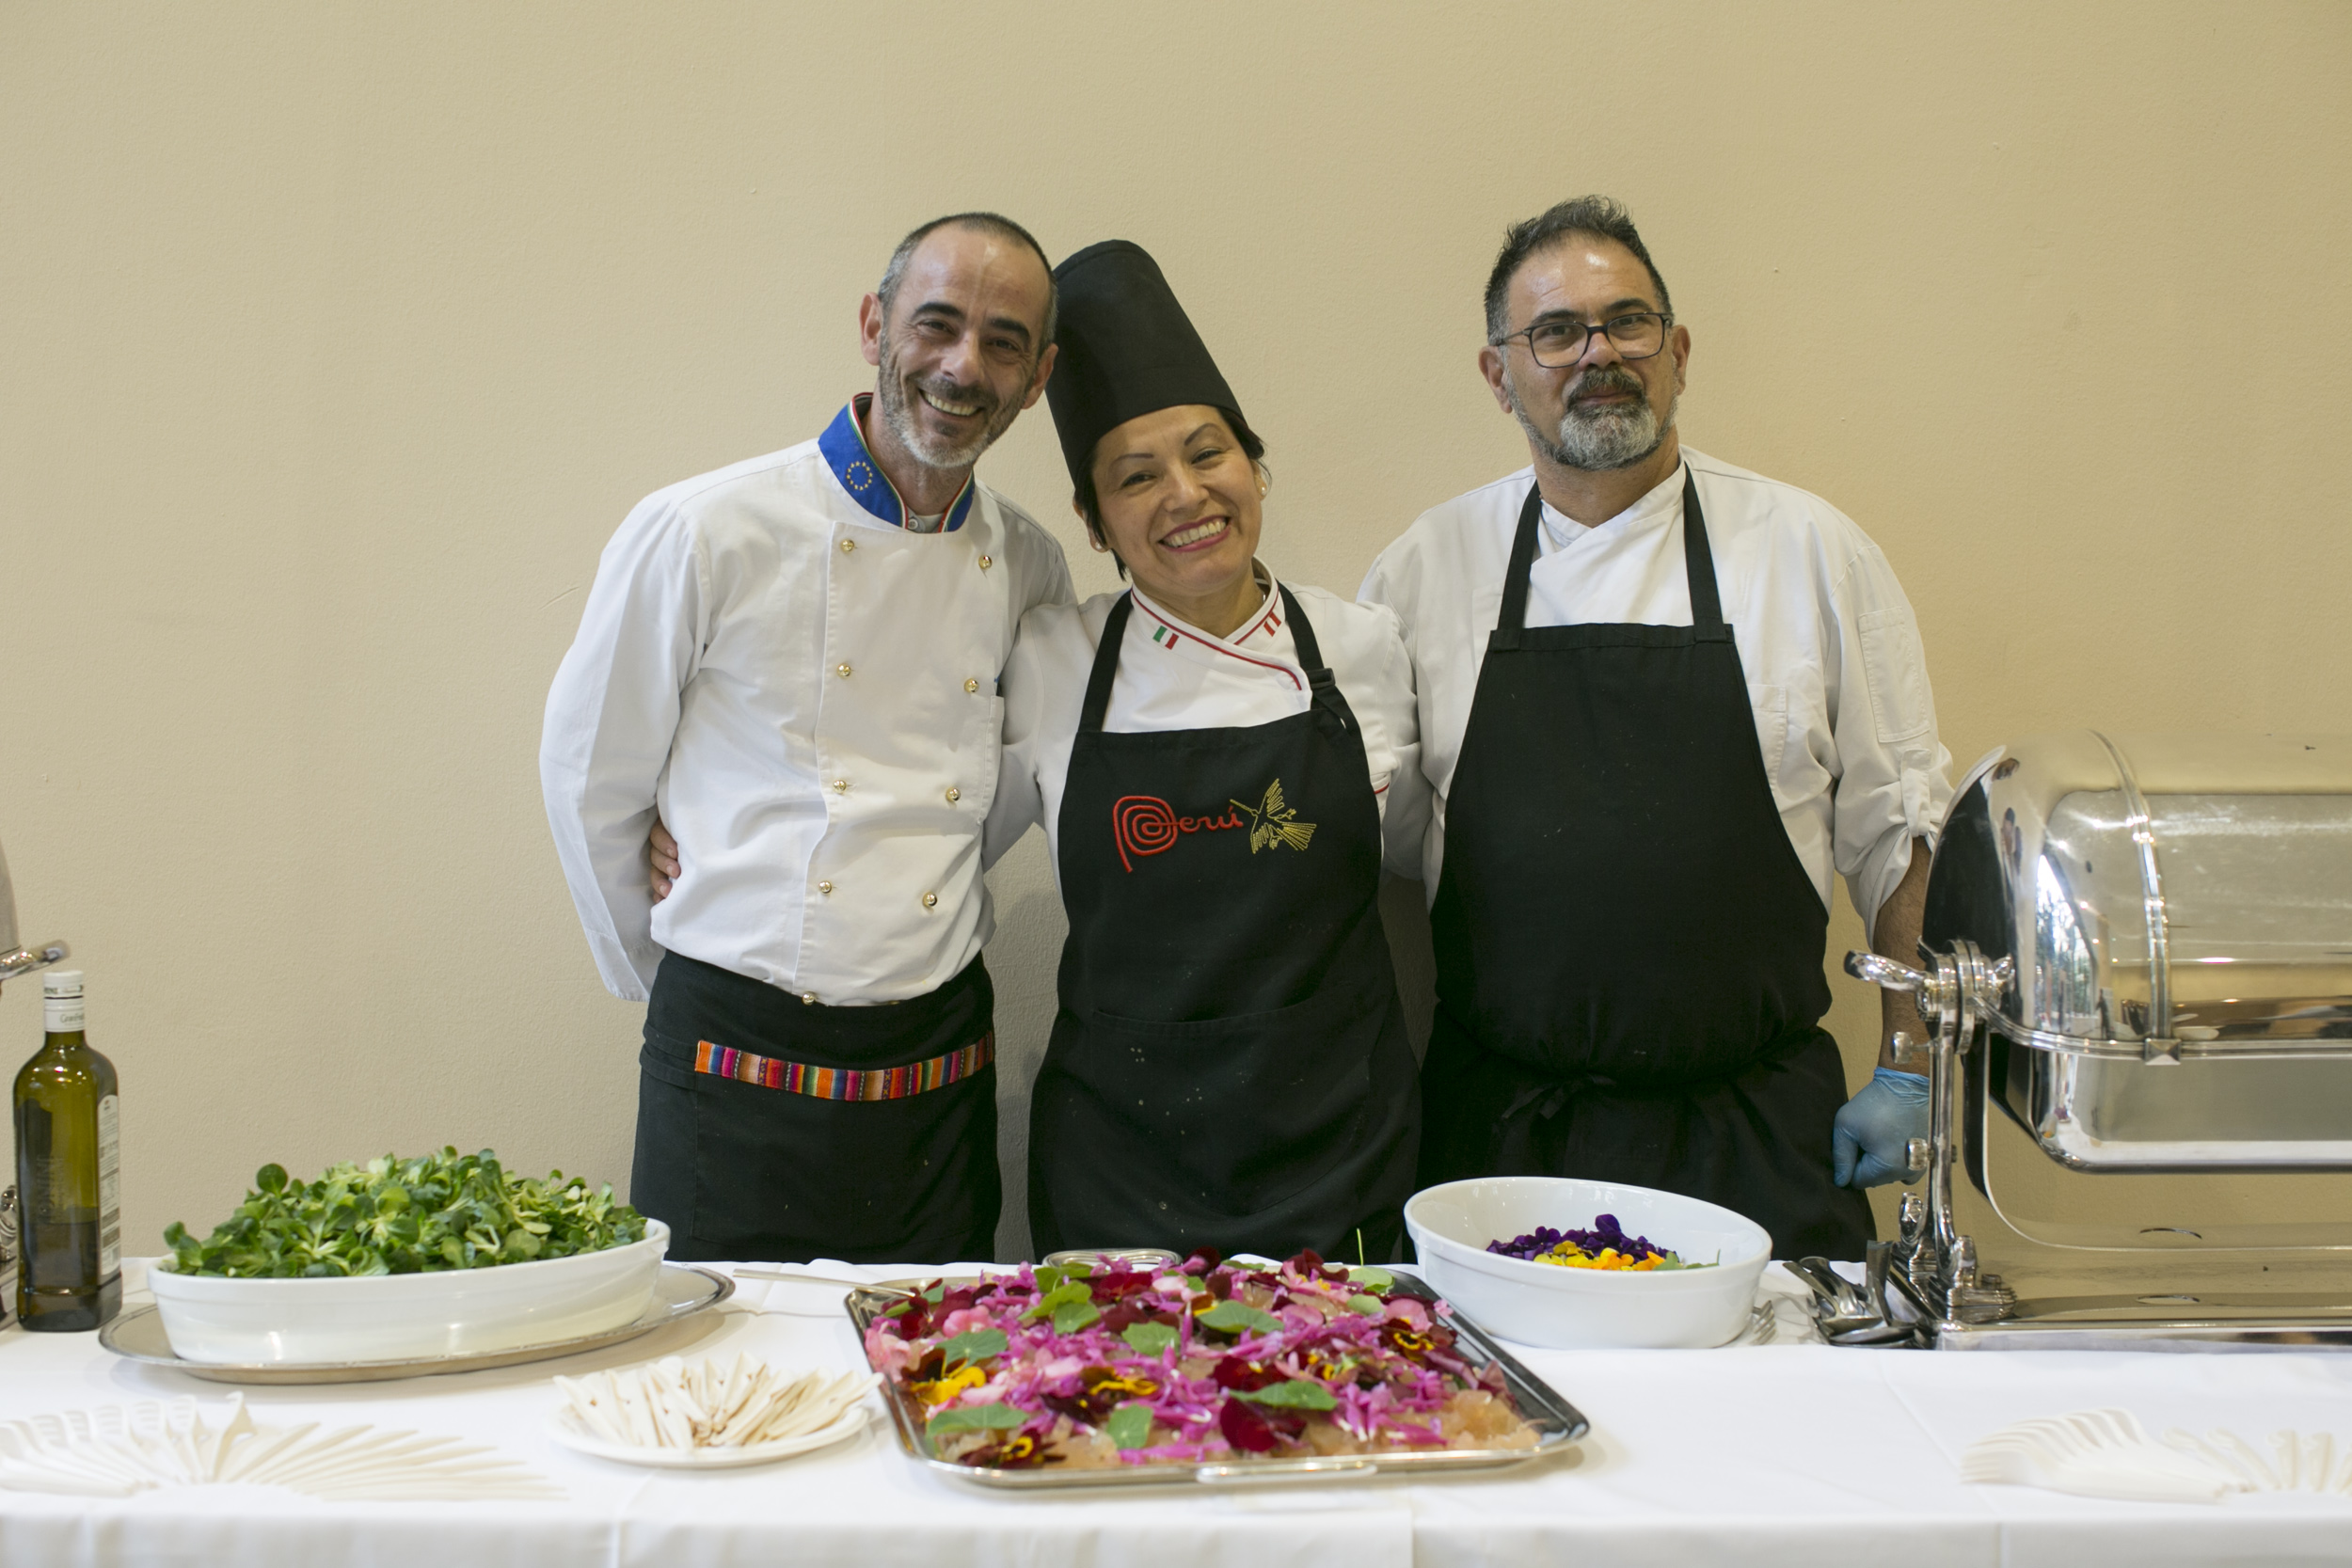 Menu Chef with Flowers - second day